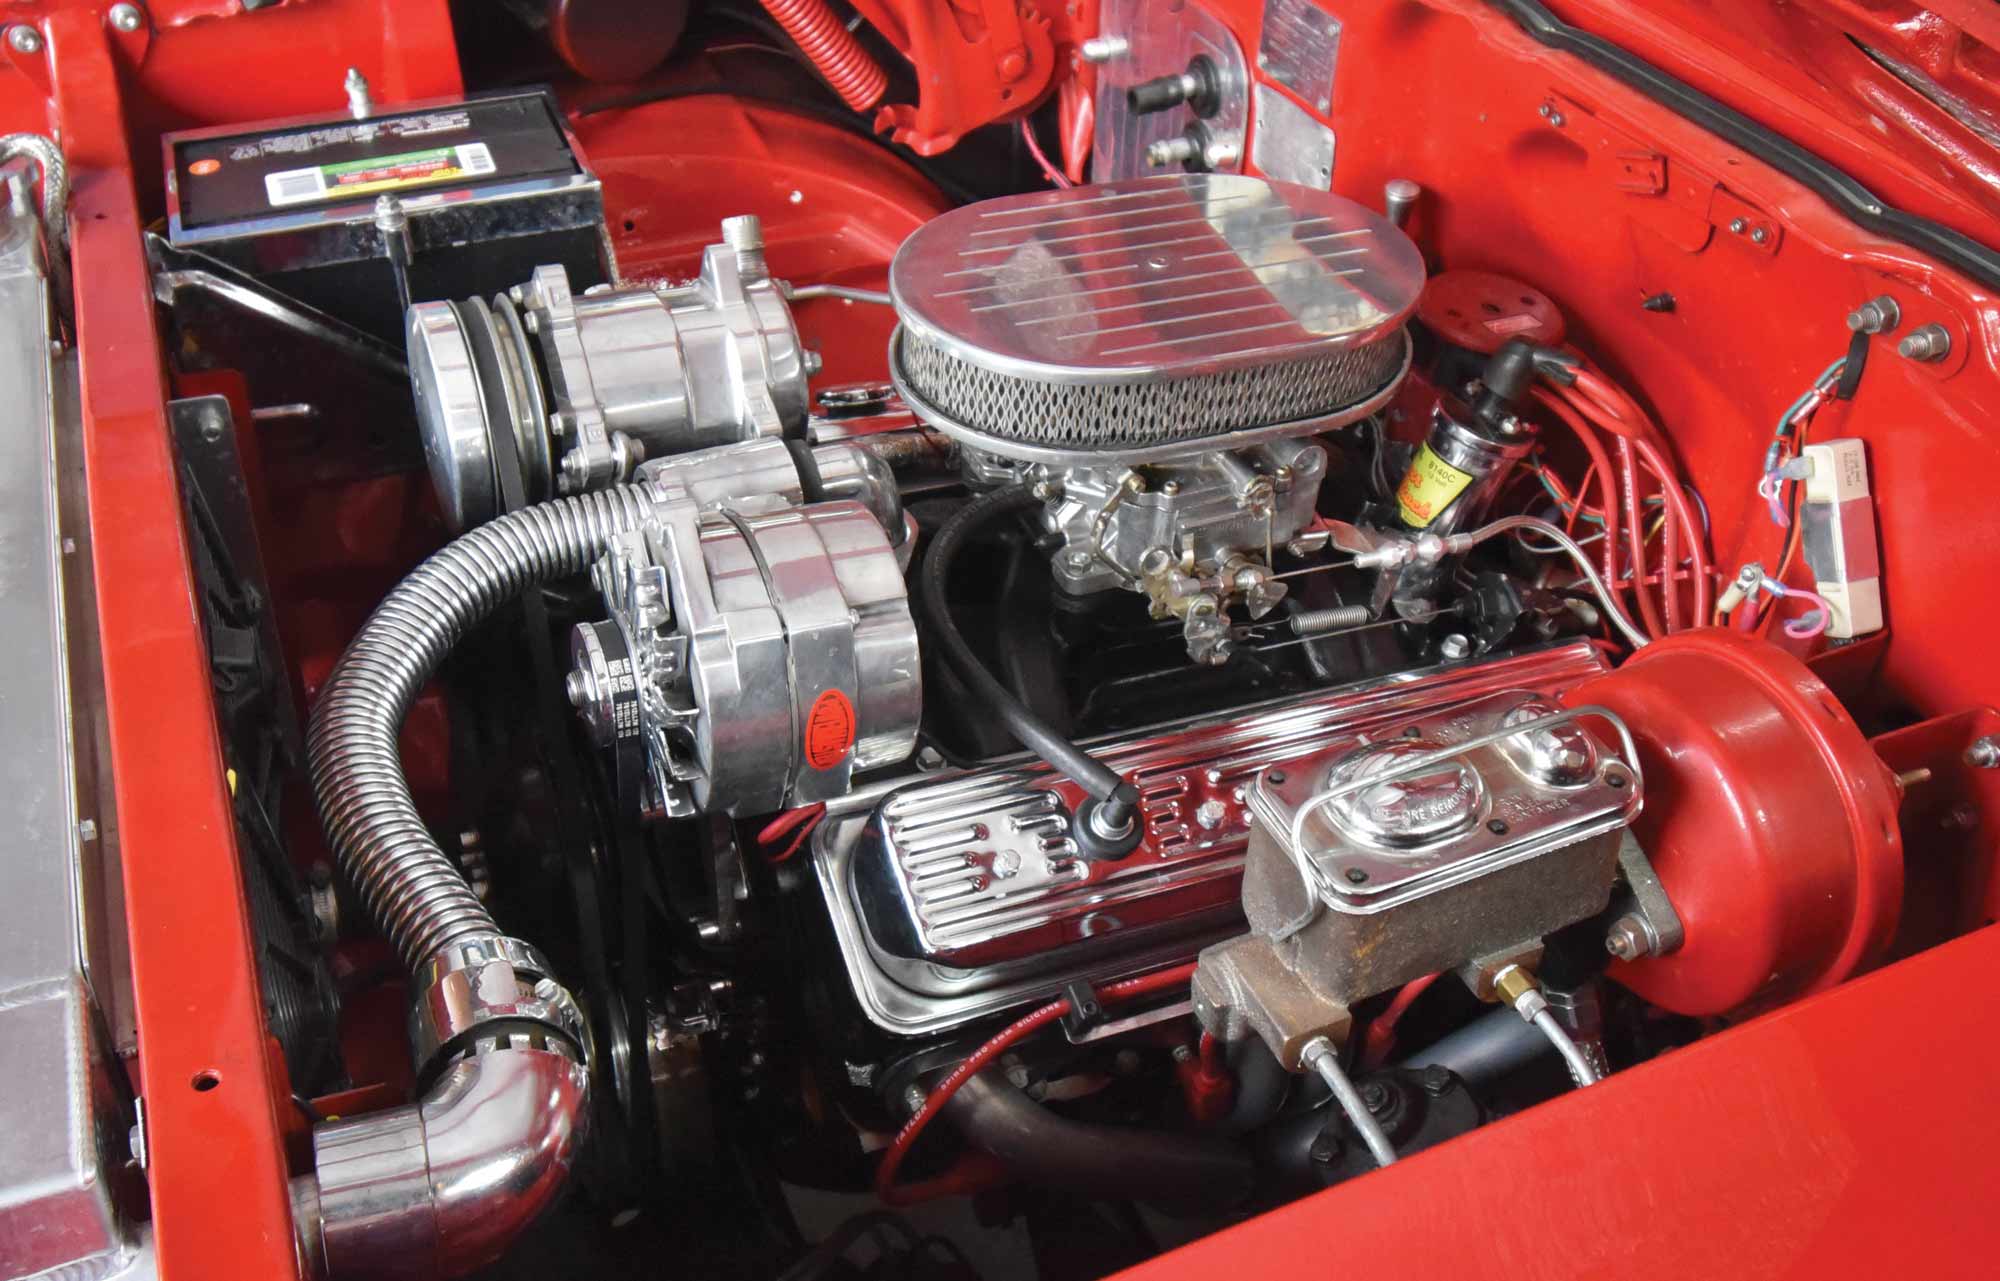 Under the hood of the red car rests a mildly modified Chevrolet 350 crate engine from BluePrint Engines in Kearny, NE